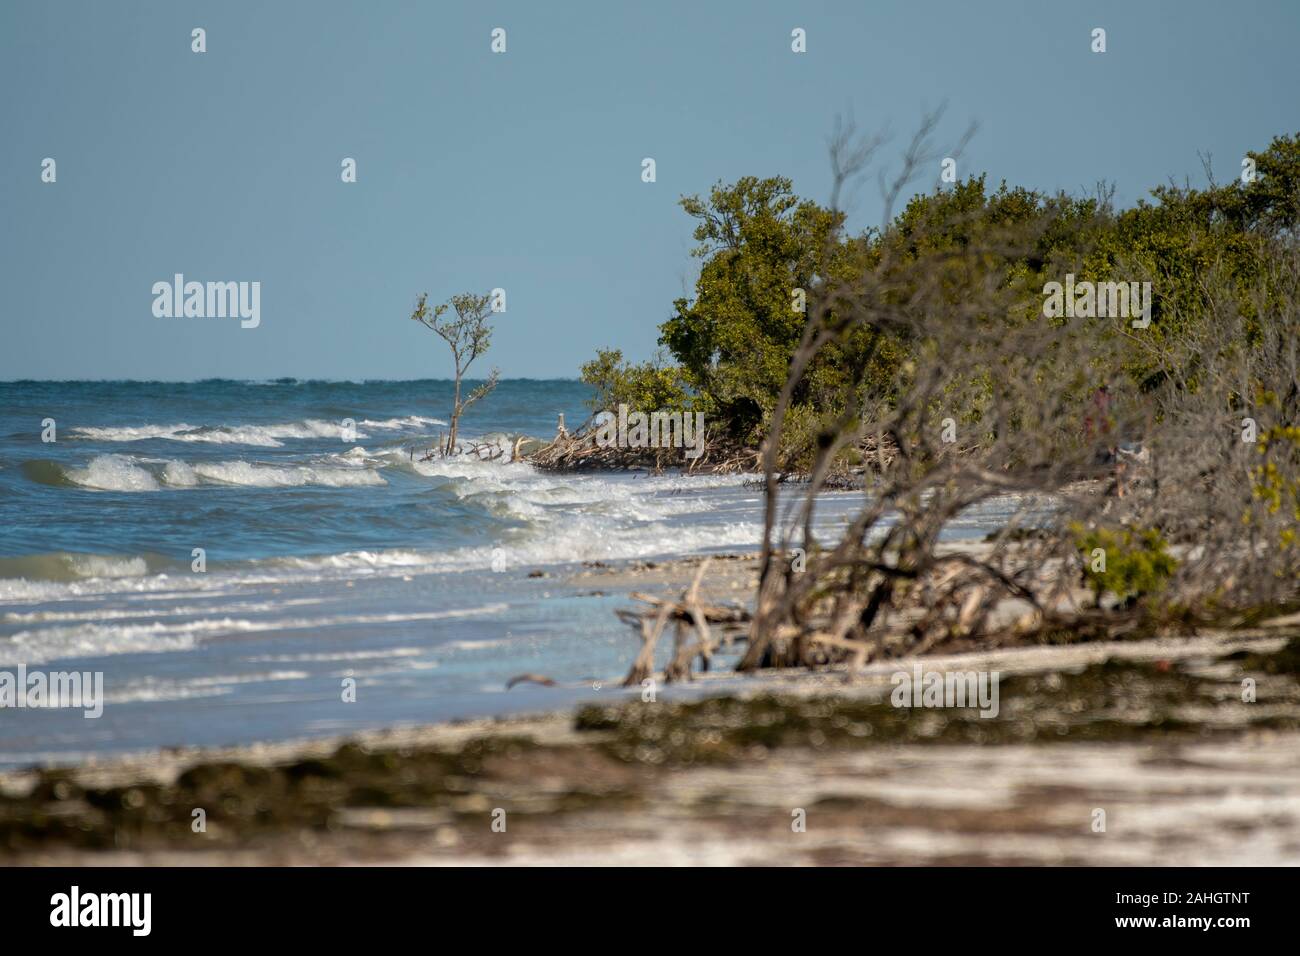 View of an island beach on the Gulf of Mexico in Florida Stock Photo